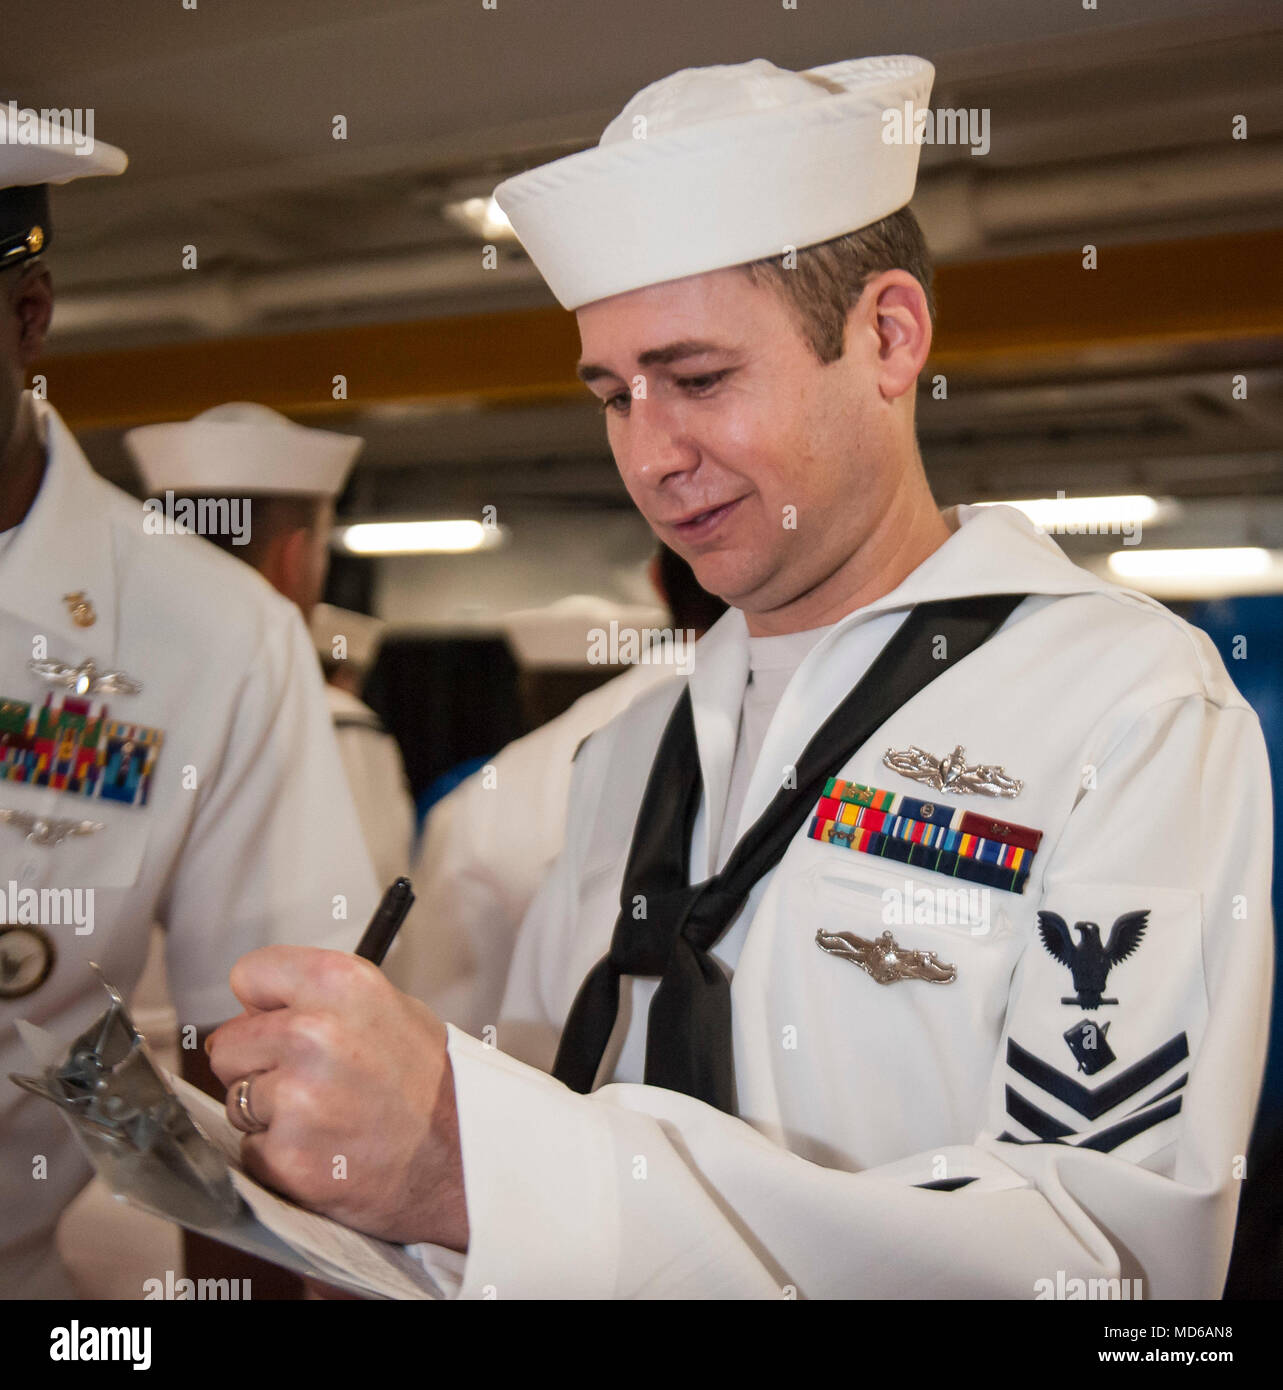 180326-N-WX604-0070 ATLANTIC OCEAN (March 26, 2018) Personnel Specialist 1st Class William E. Curtis, from Houston, Texas, annotates uniform discrepancies during a service dress white uniform inspection in the fo'c'sle aboard the aircraft carrier USS George H.W. Bush (CVN 77). The ship is underway conducting sustainment exercises to maintain carrier readiness. (U.S. Navy photo by Mass Communication Specialist 2nd Class Joseph E. Montemarano) Stock Photo